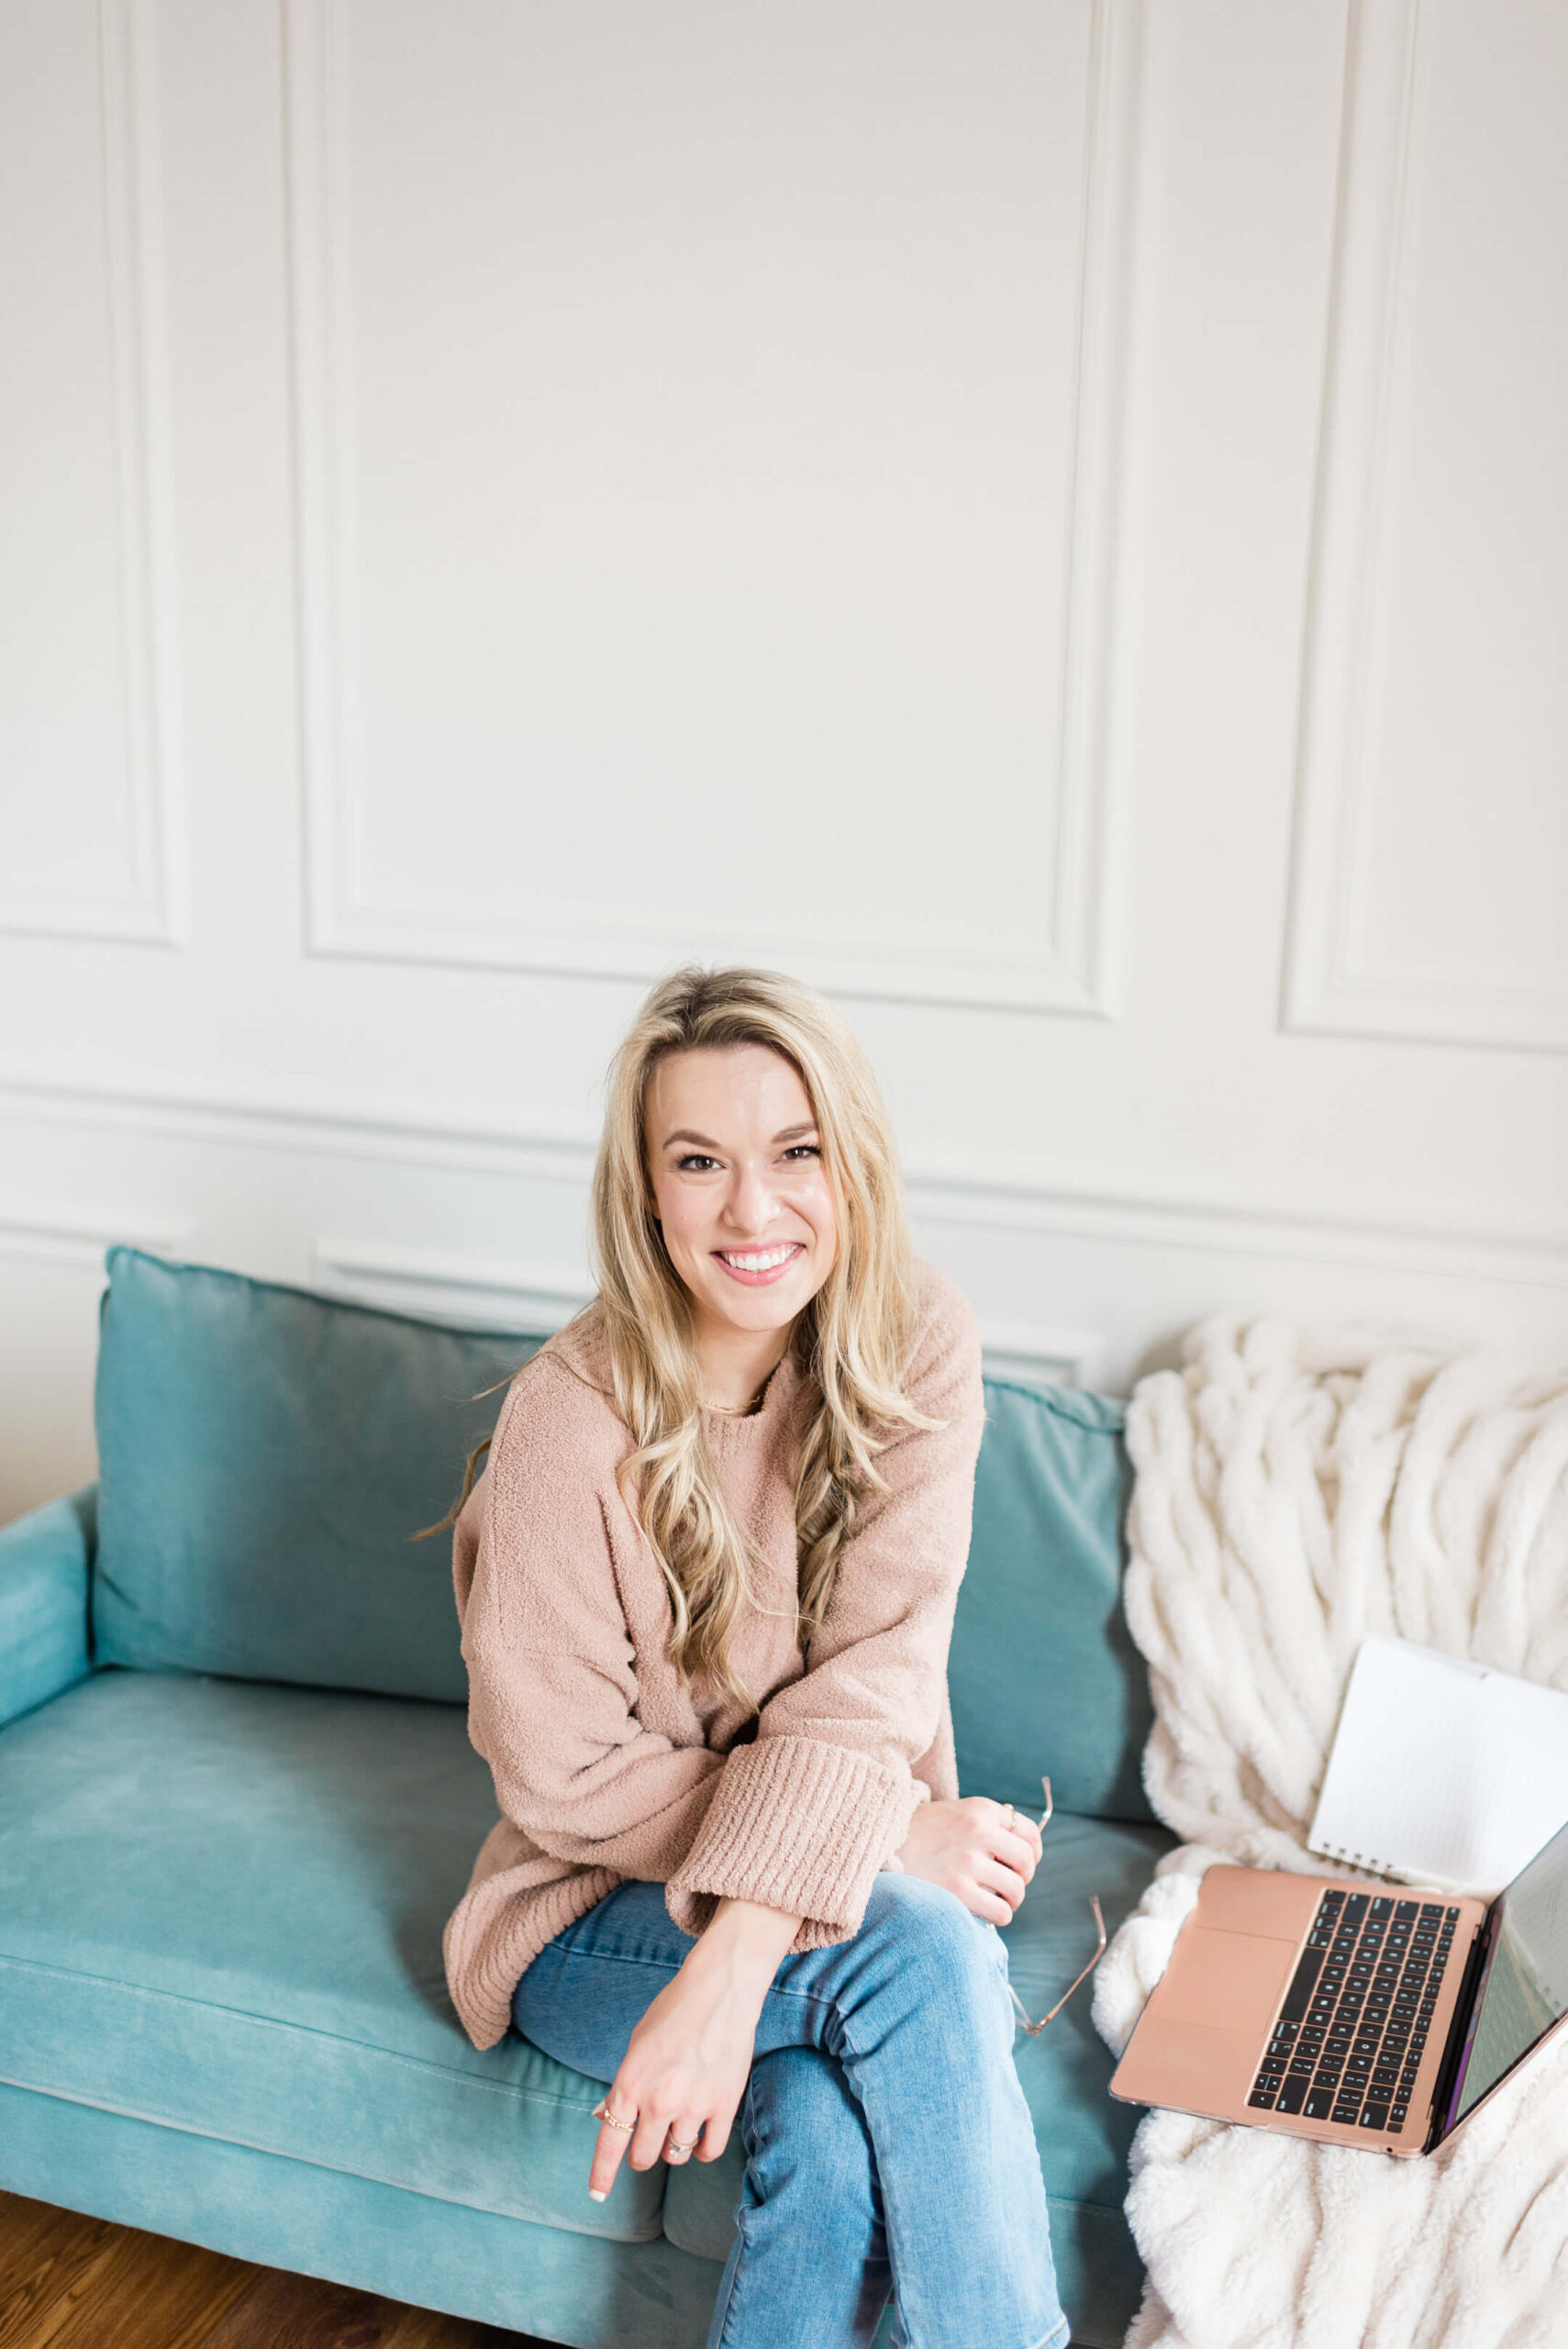 Woman on a blue couch wearing a pink sweater. She is smiling at the camera